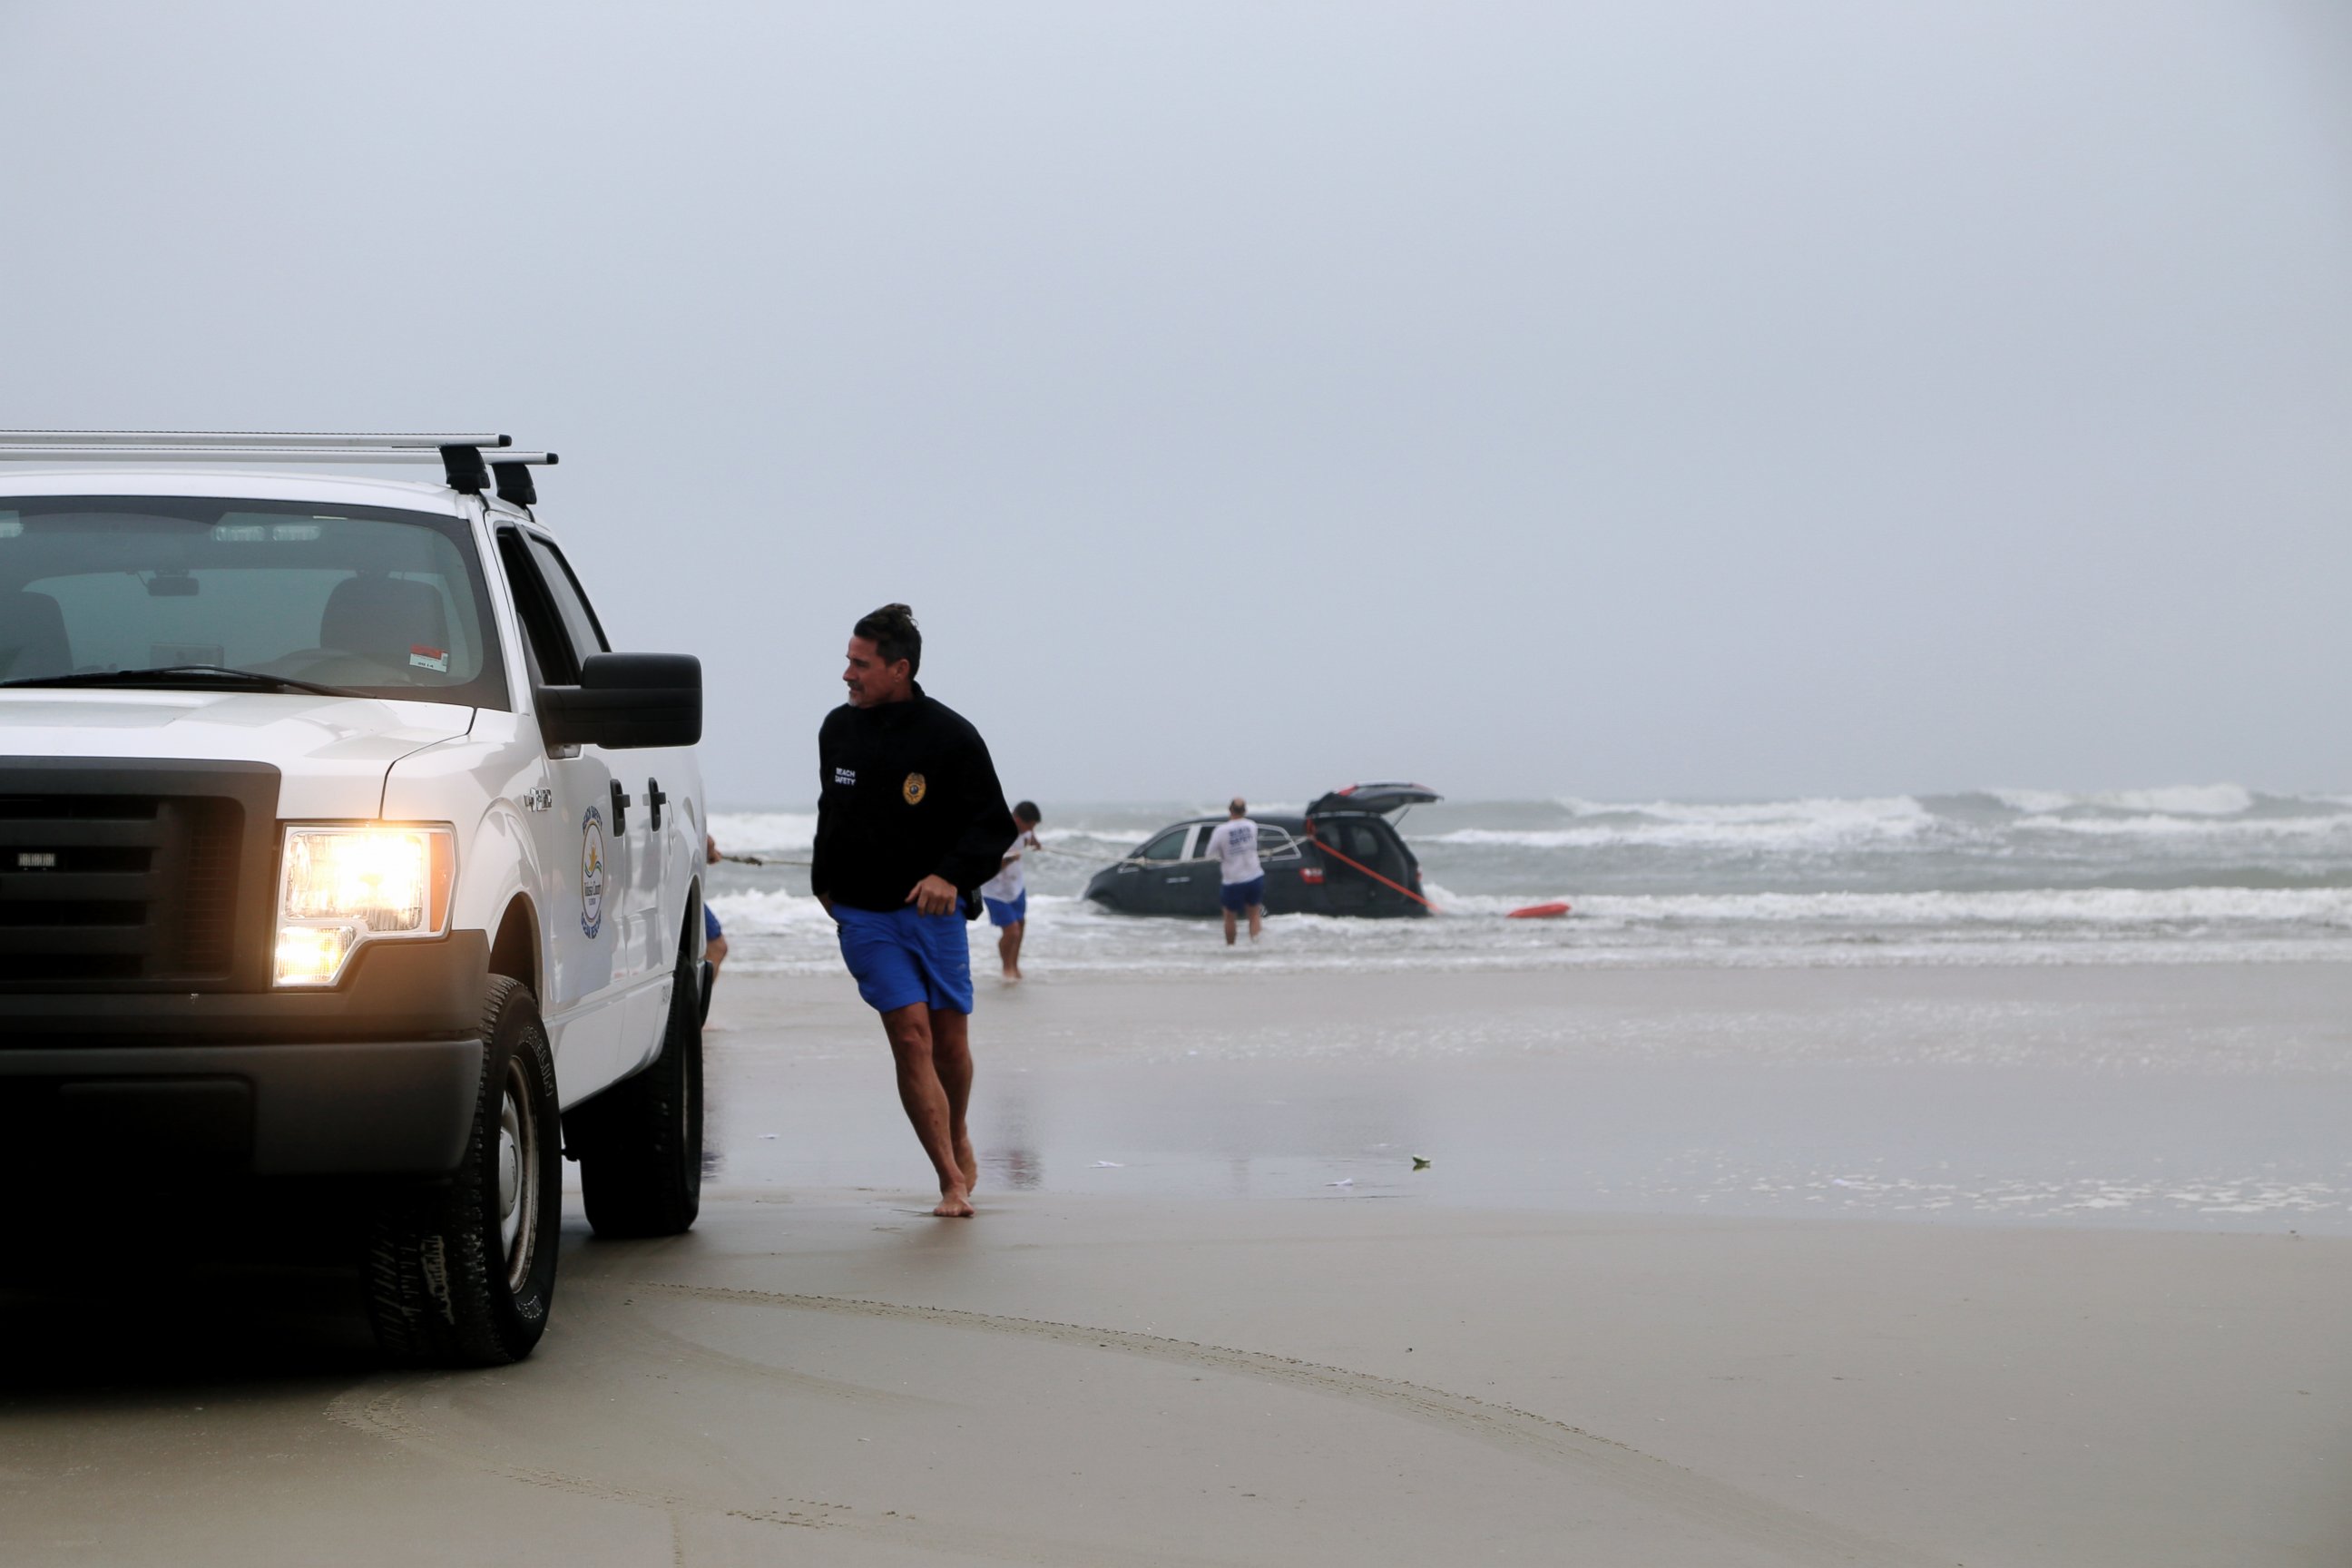 PHOTO: Lifeguards on scene to help rescue a family after a mother drives her car in to the ocean, March 5, 2014 in Daytona Beach, Fla.